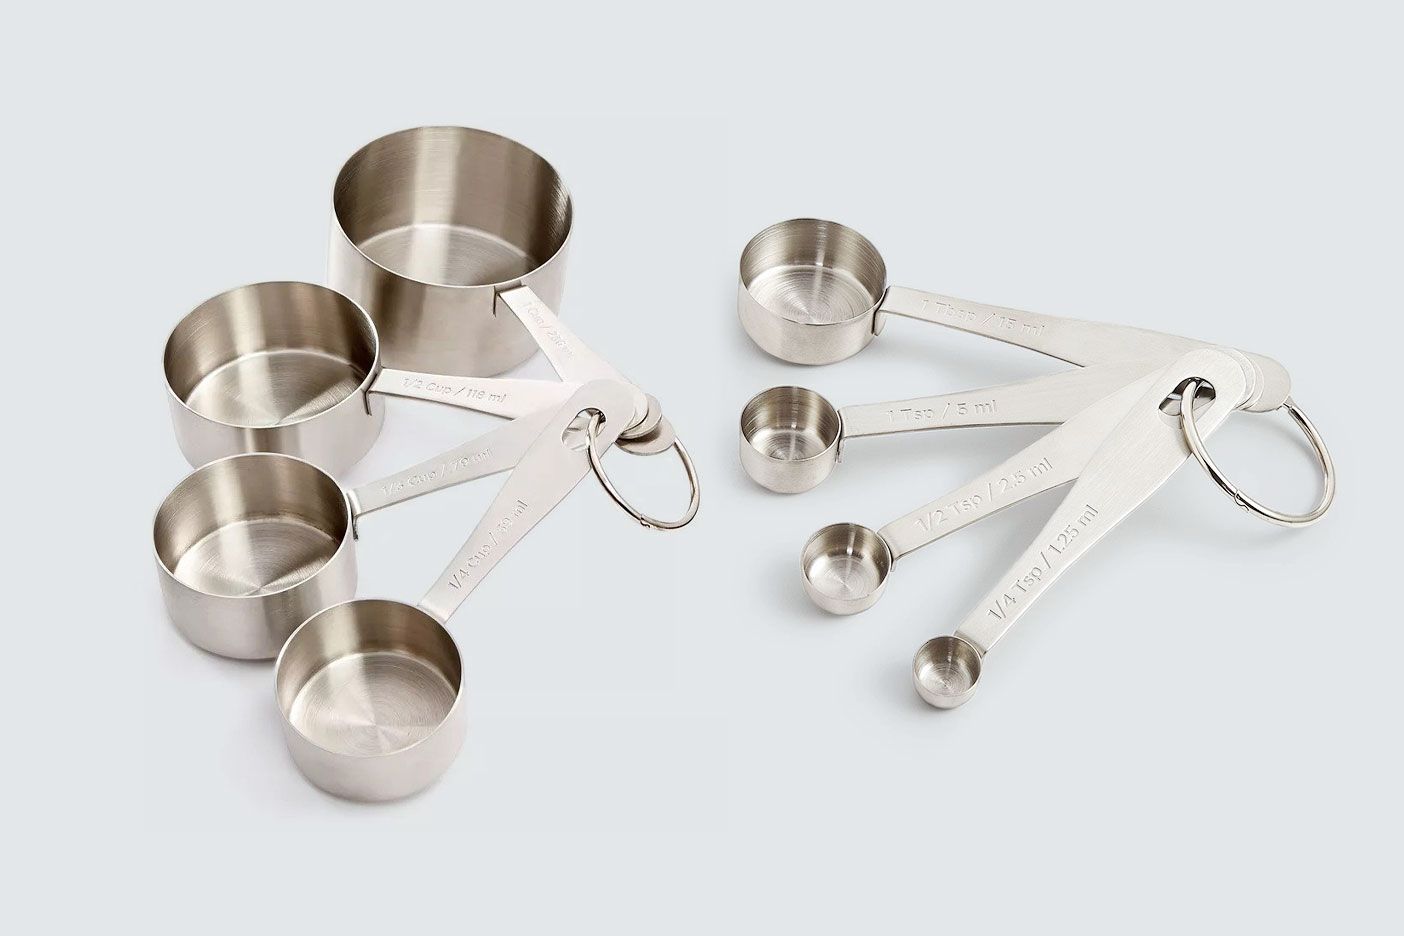 martha stewart collection stainless steel measuring spoons and cups